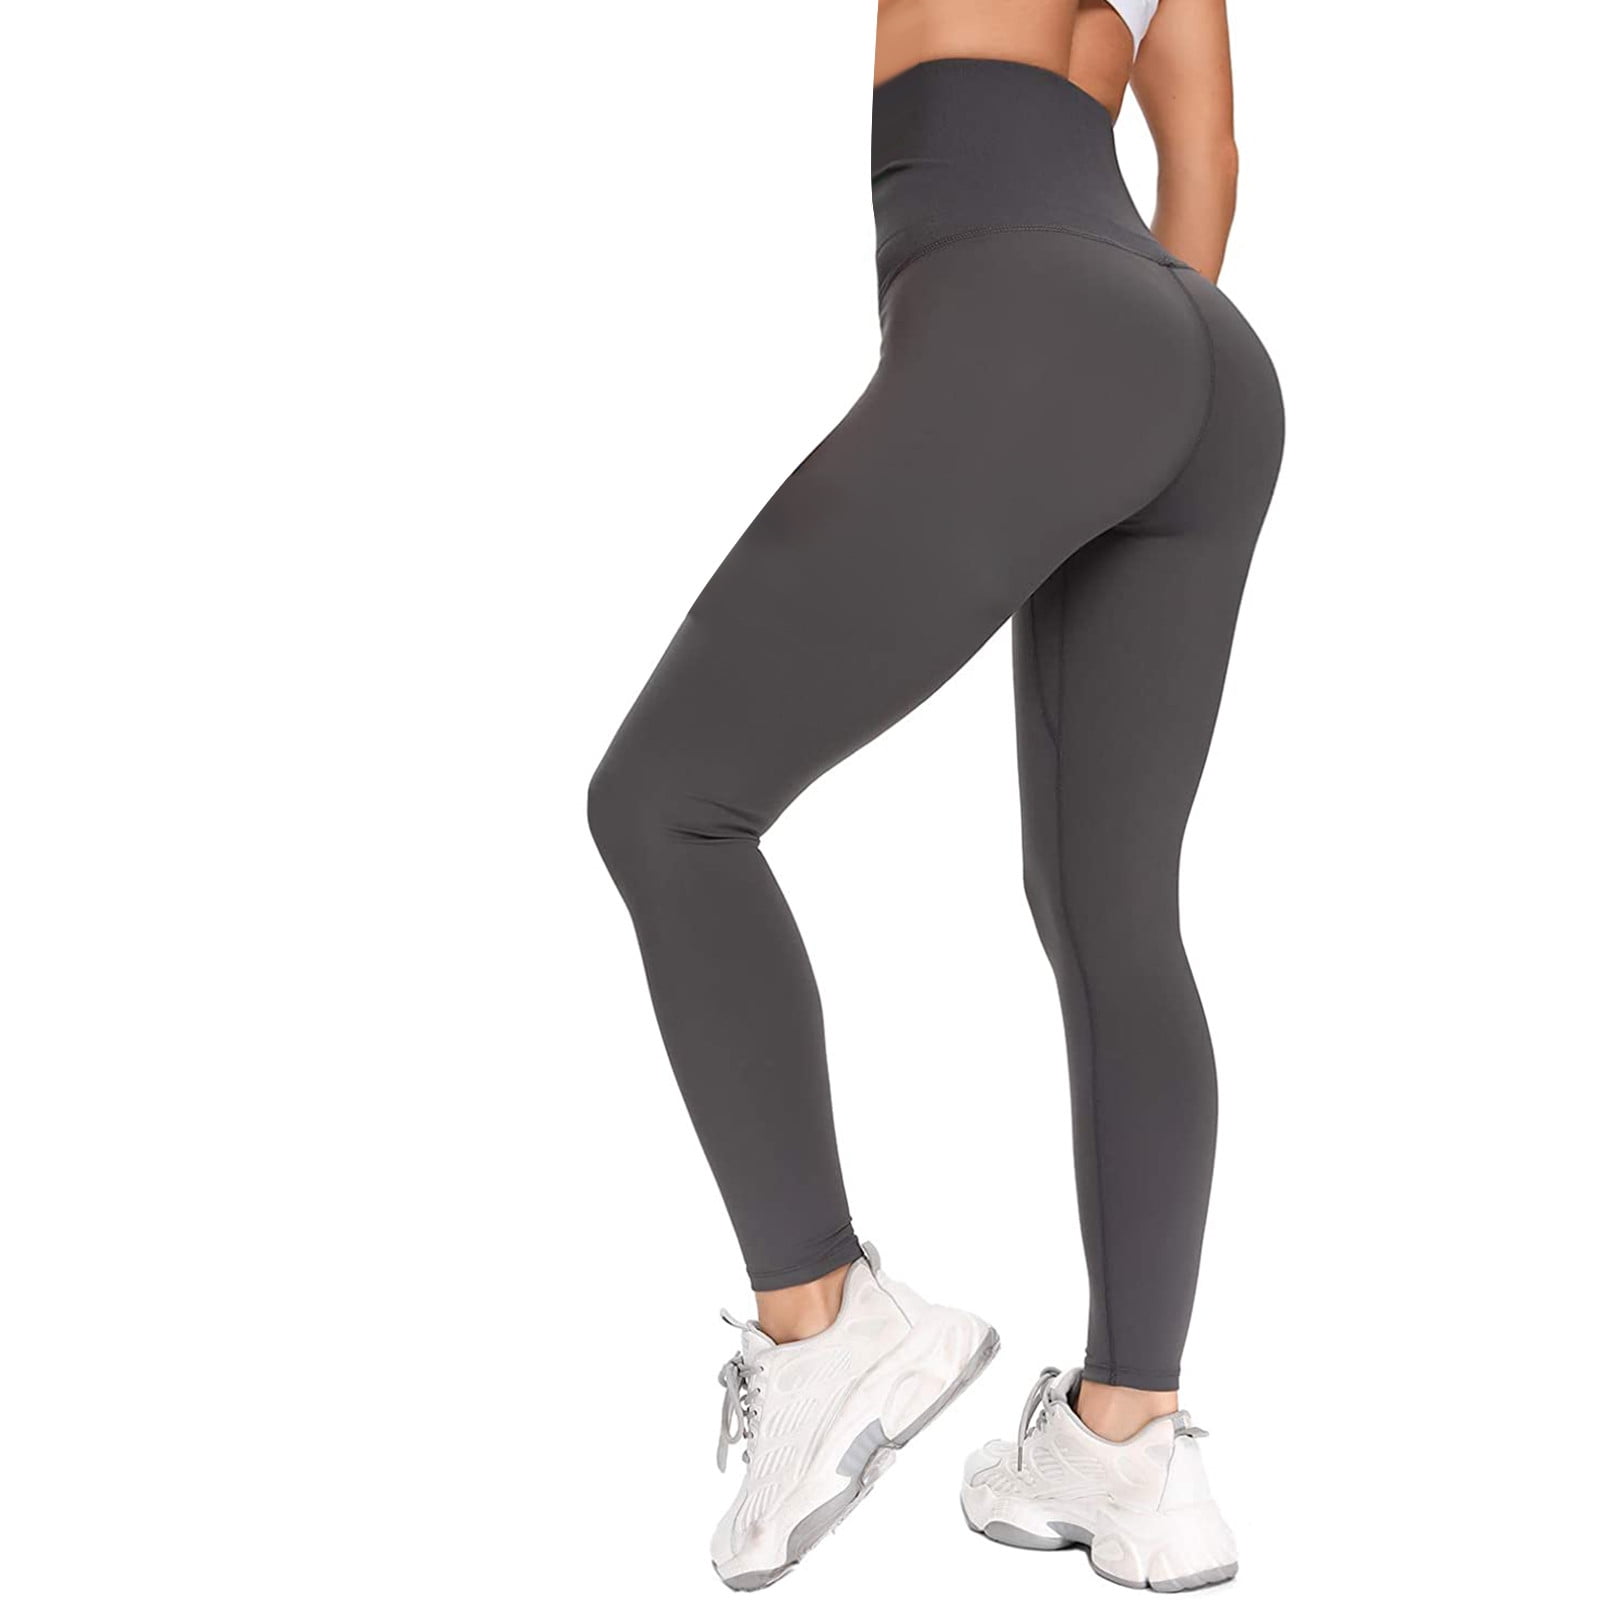 SINOPHANT High Waisted Leggings for Women, Buttery Soft Elastic Opaque  Tummy Control Leggings,Plus Size Workout Gym Yoga Stretchy Pants, #1 Pack,  Grey, S-M price in UAE,  UAE